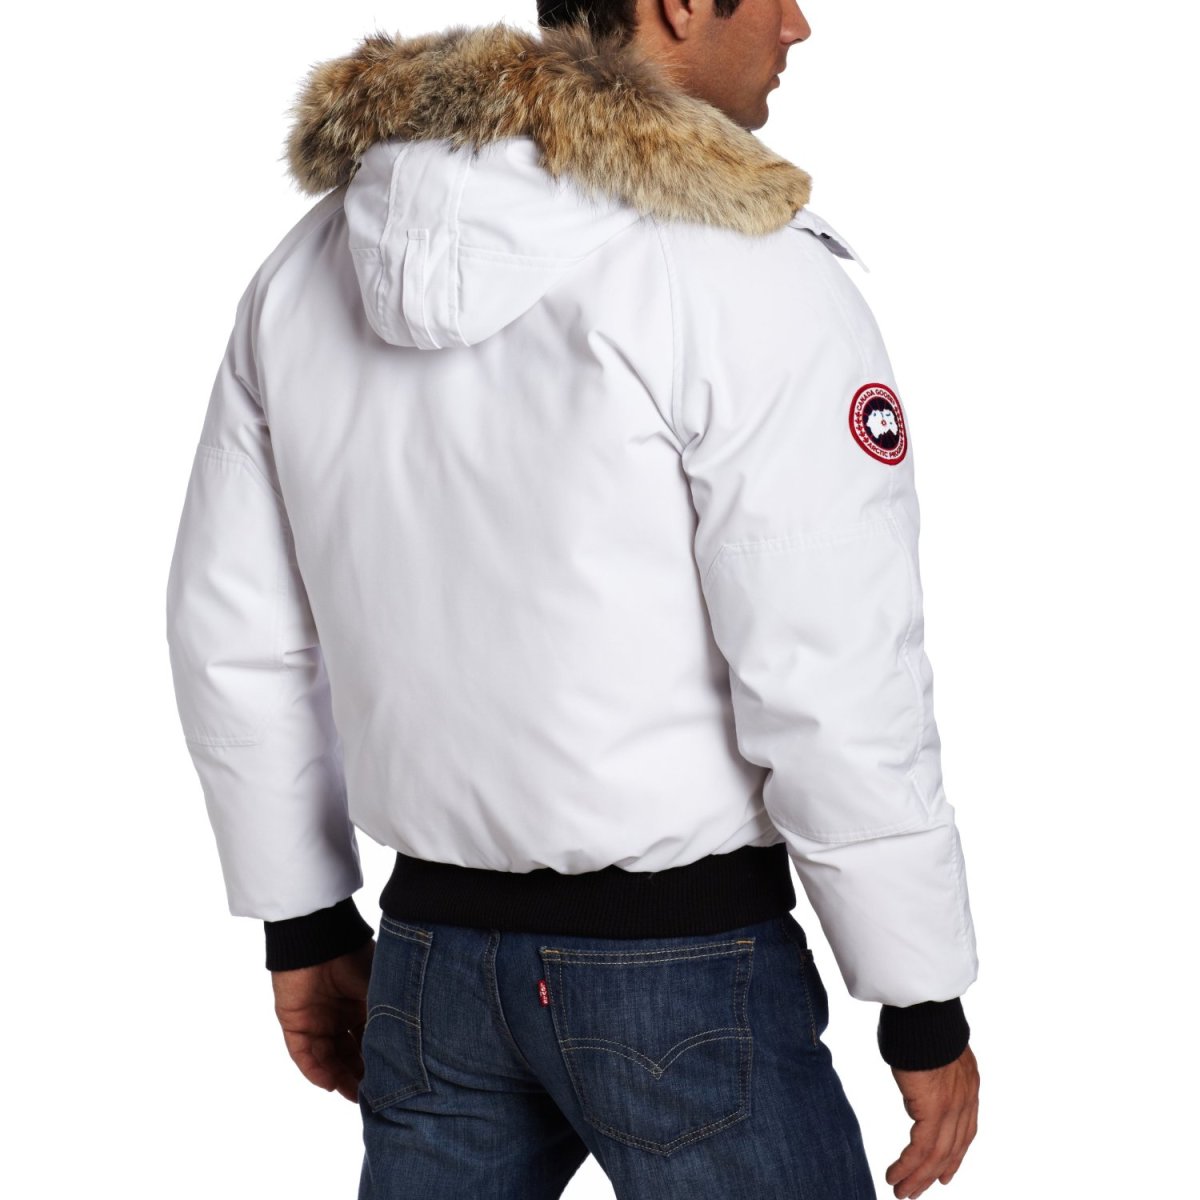 Canada Goose montebello parka sale shop - A Complete Review Of The Chilliwack Bomber Jacket By Canada Goose